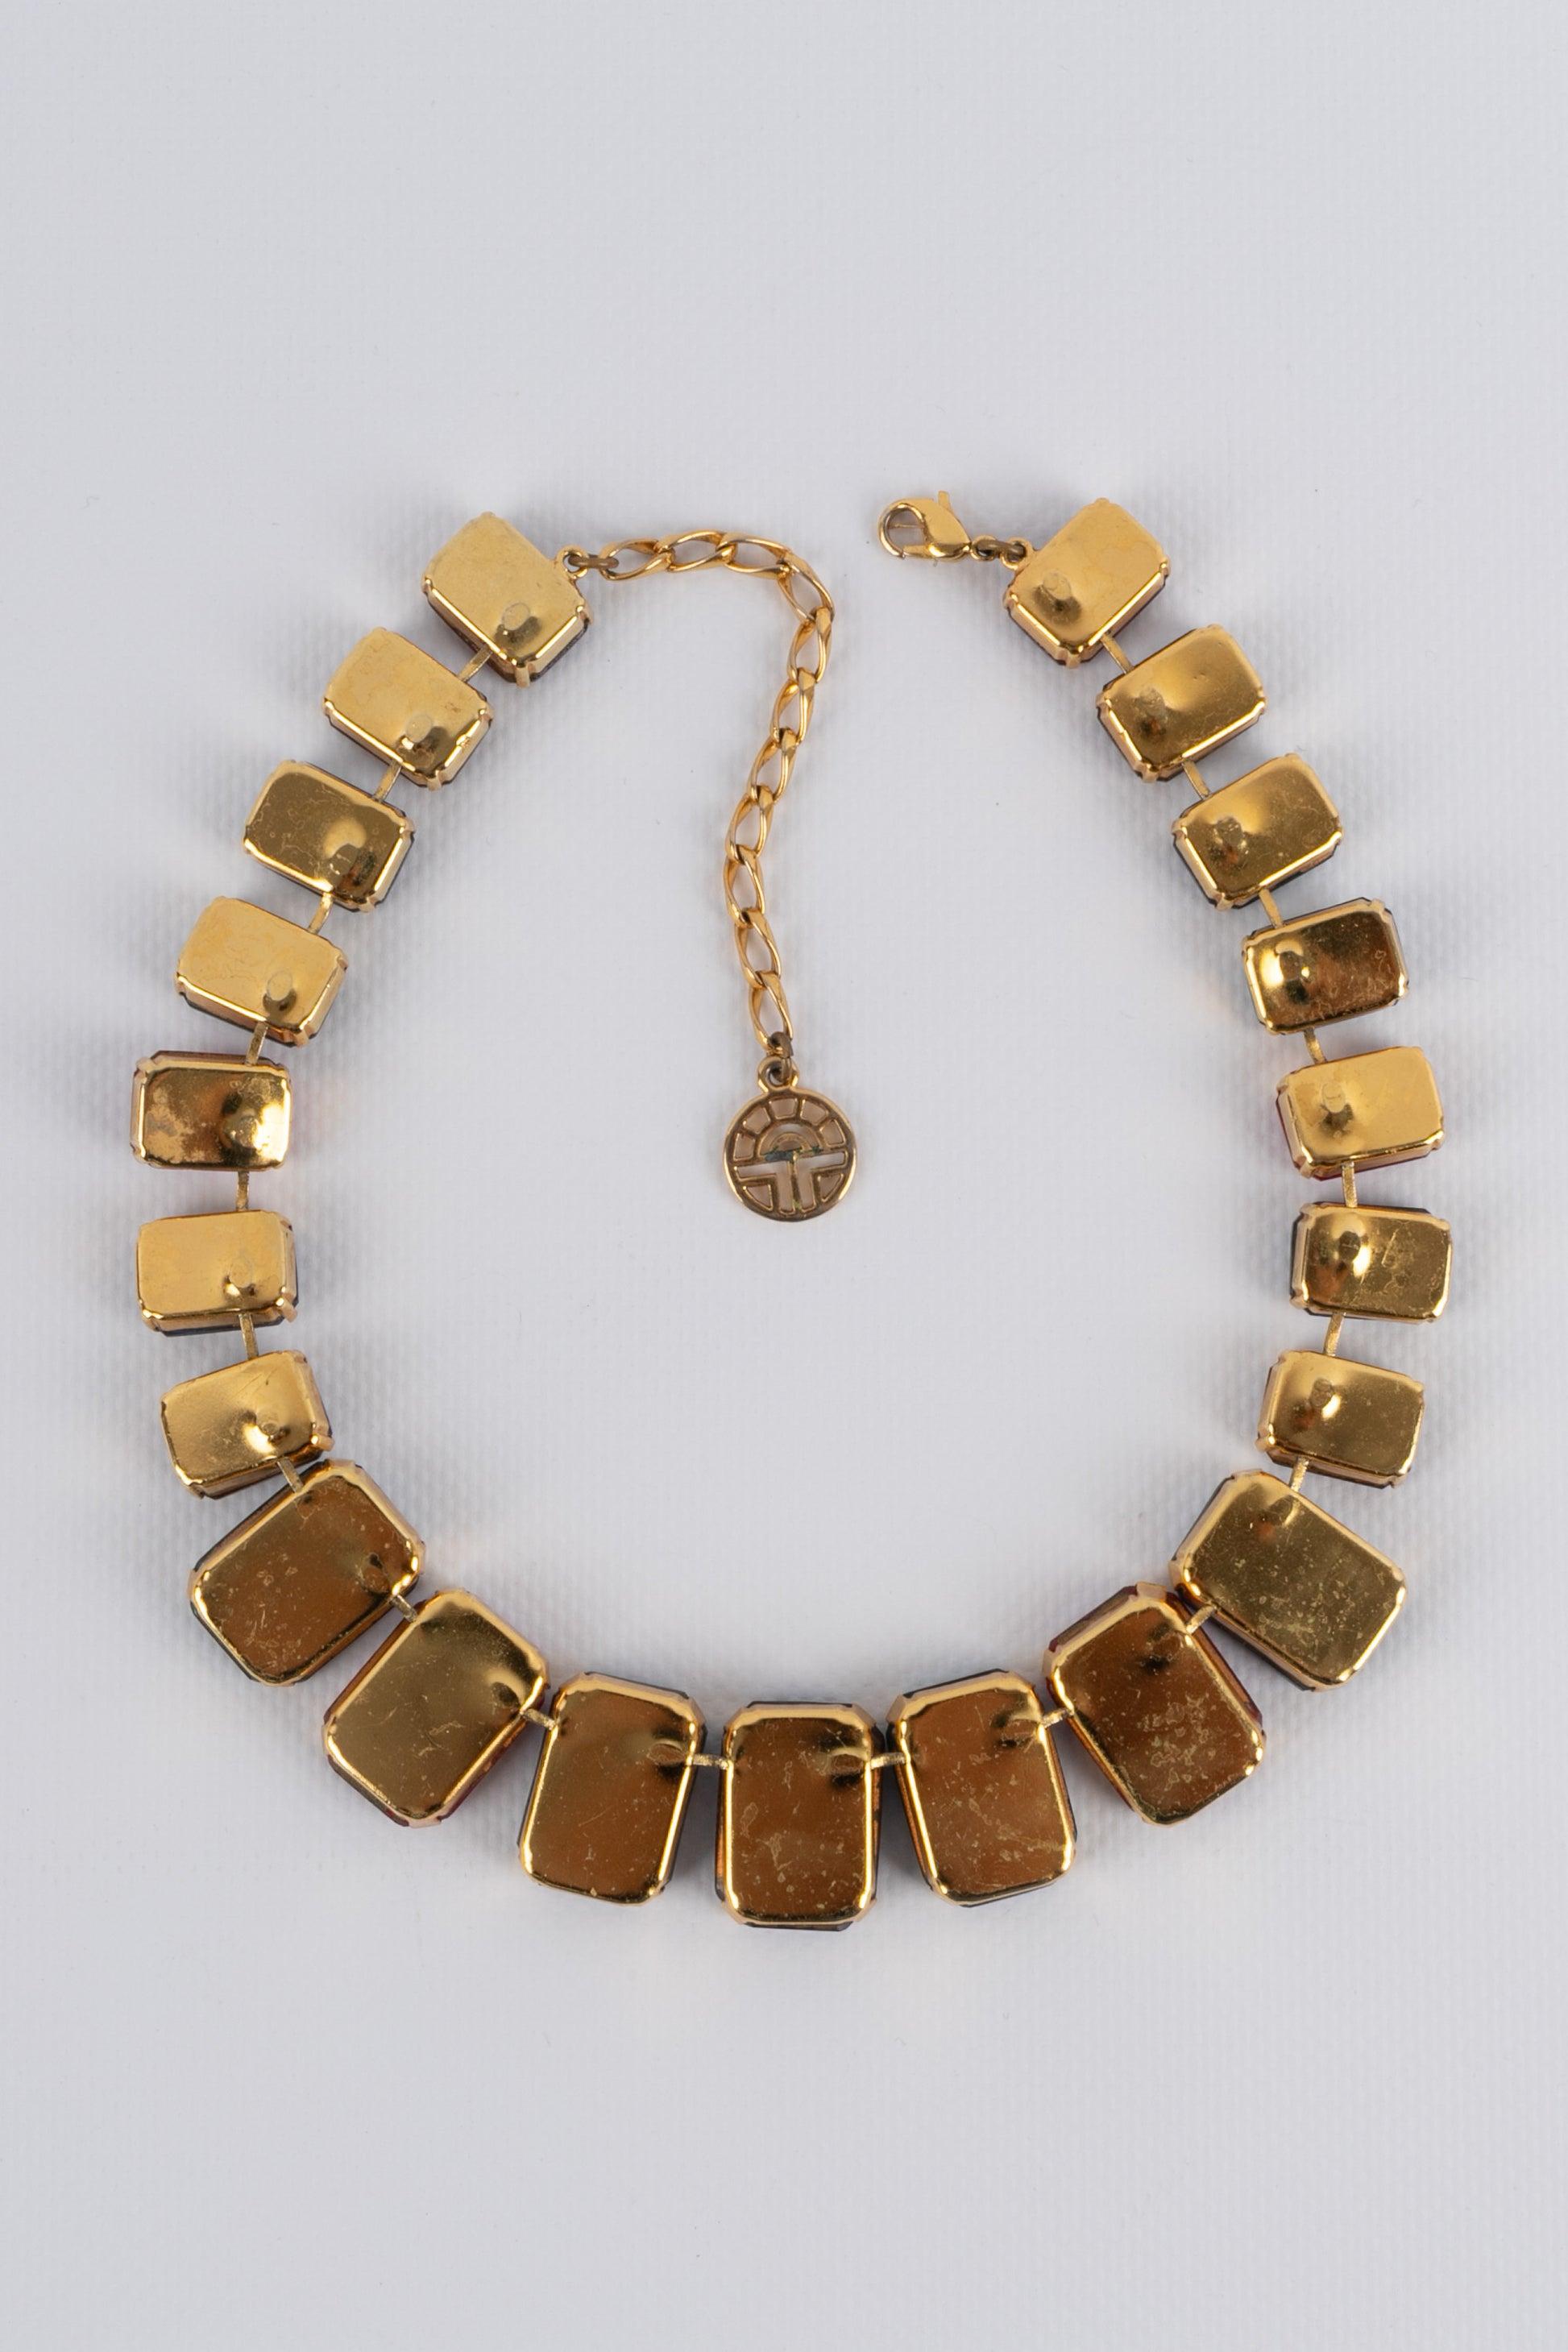 Feraud - Golden metal necklace ornamented with multicolored rhinestones.

Additional information:
Condition: Very good condition
Dimensions: Length: from 40 cm to 48 cm

Seller Reference: BC128